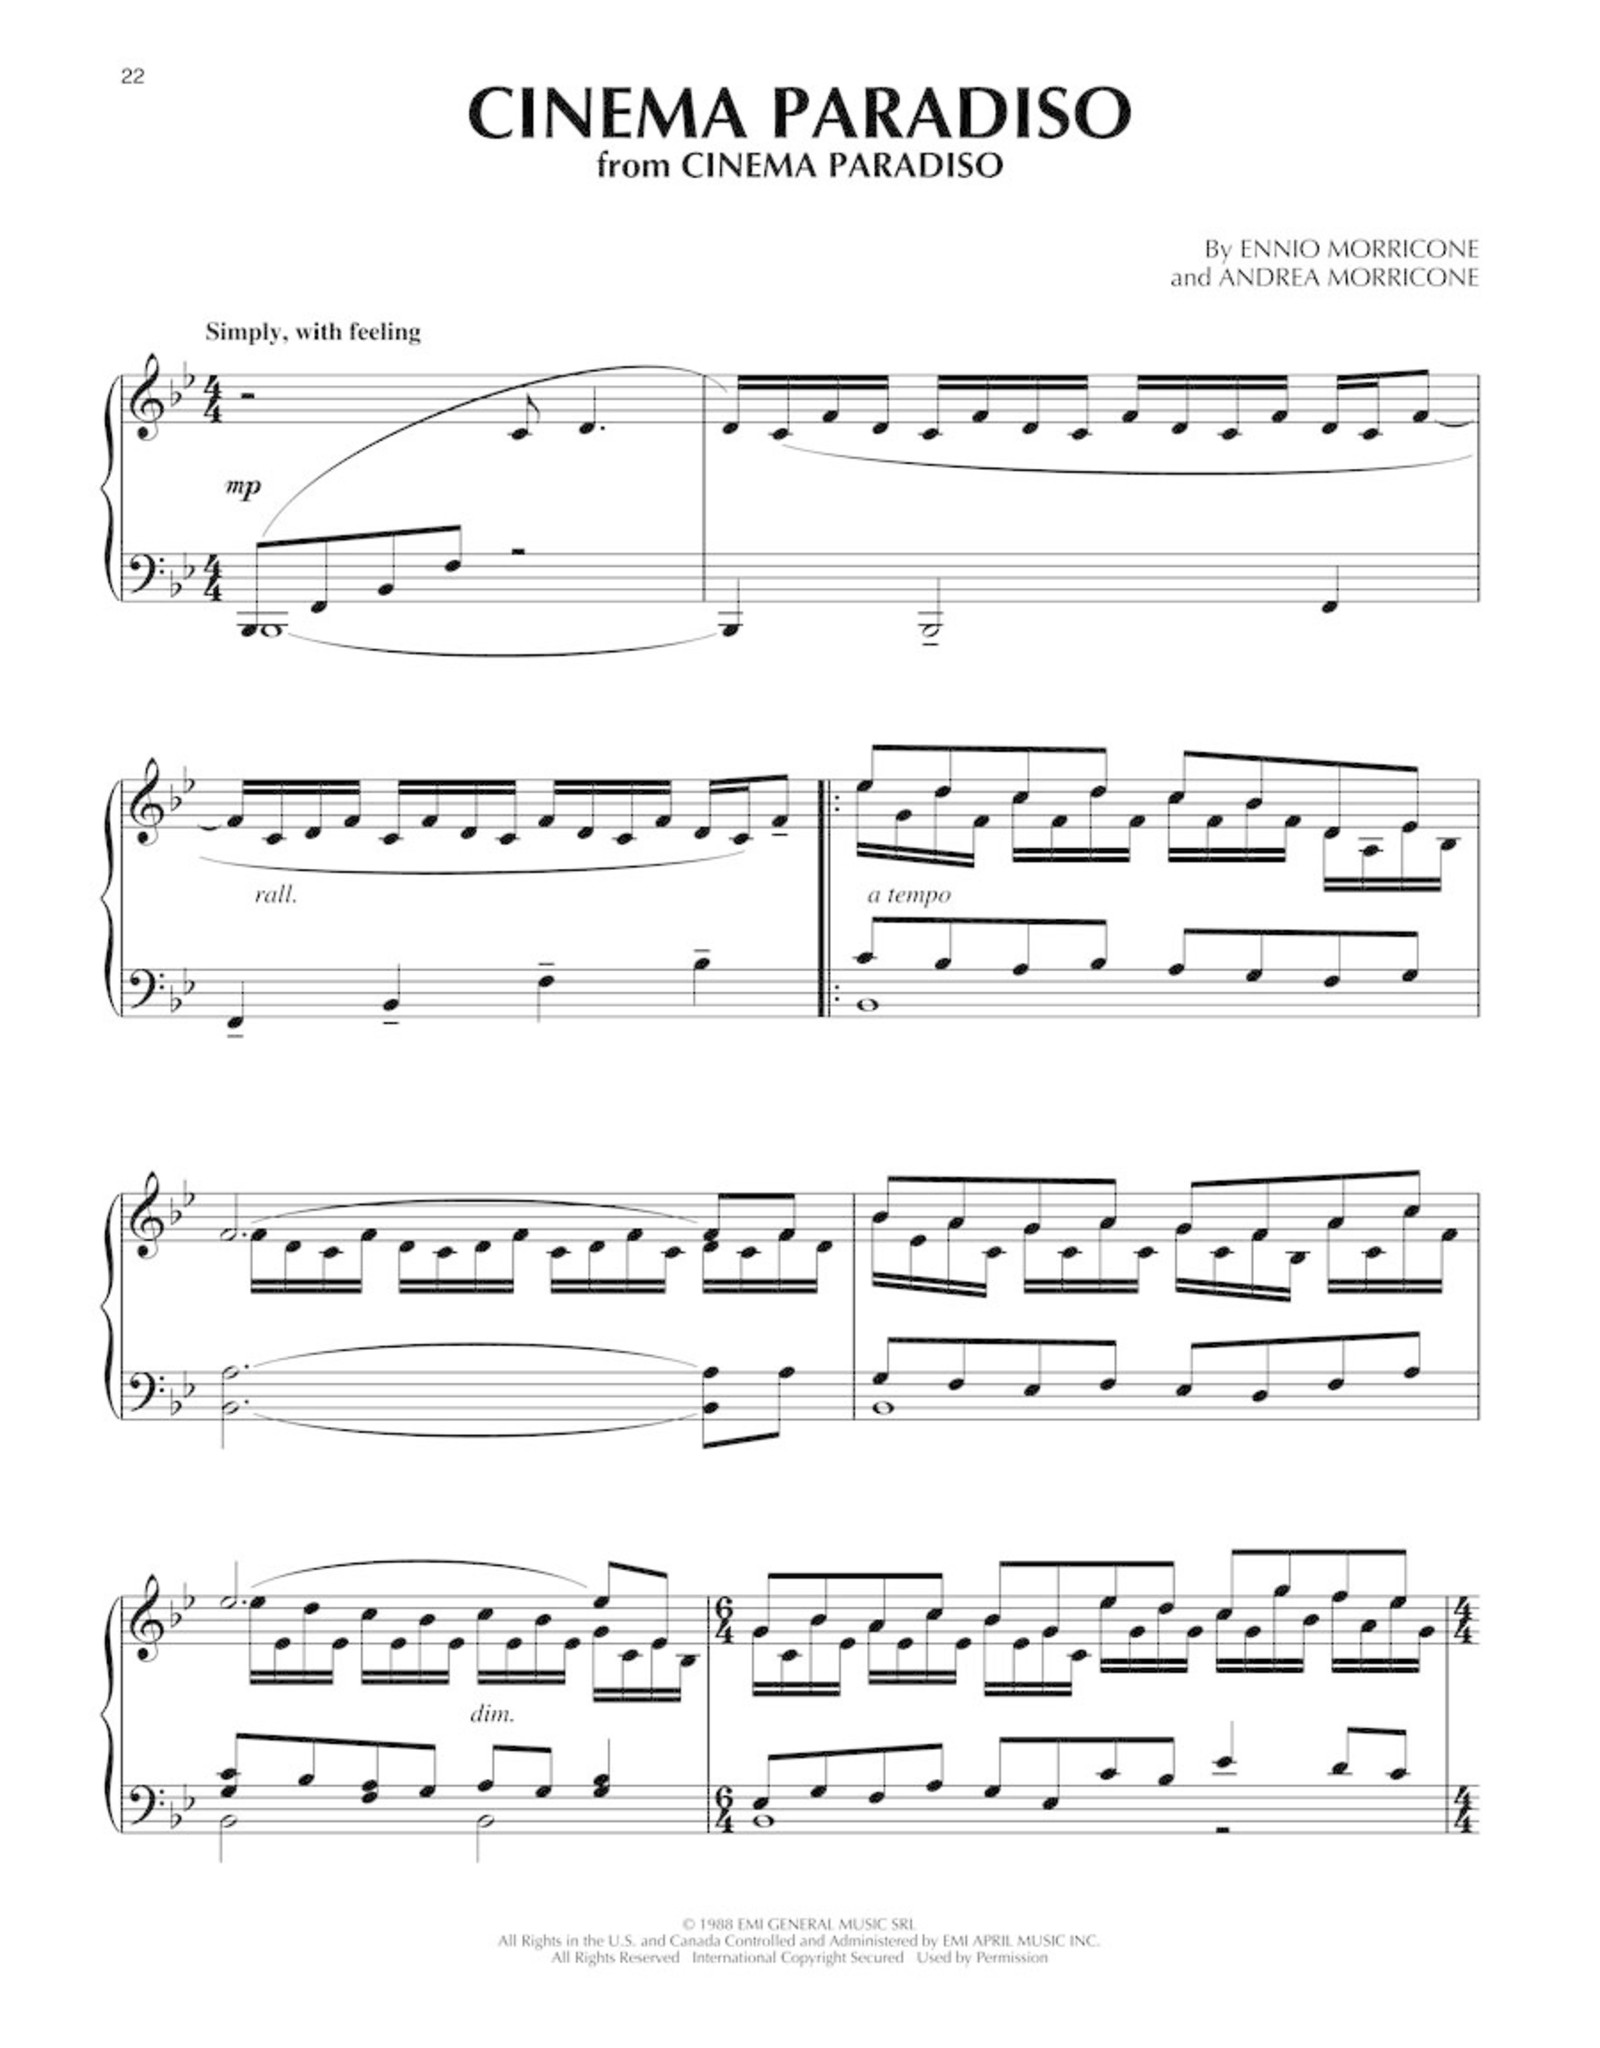 Hal Leonard River Flows in You and Other Eloquent Songs for Solo Piano